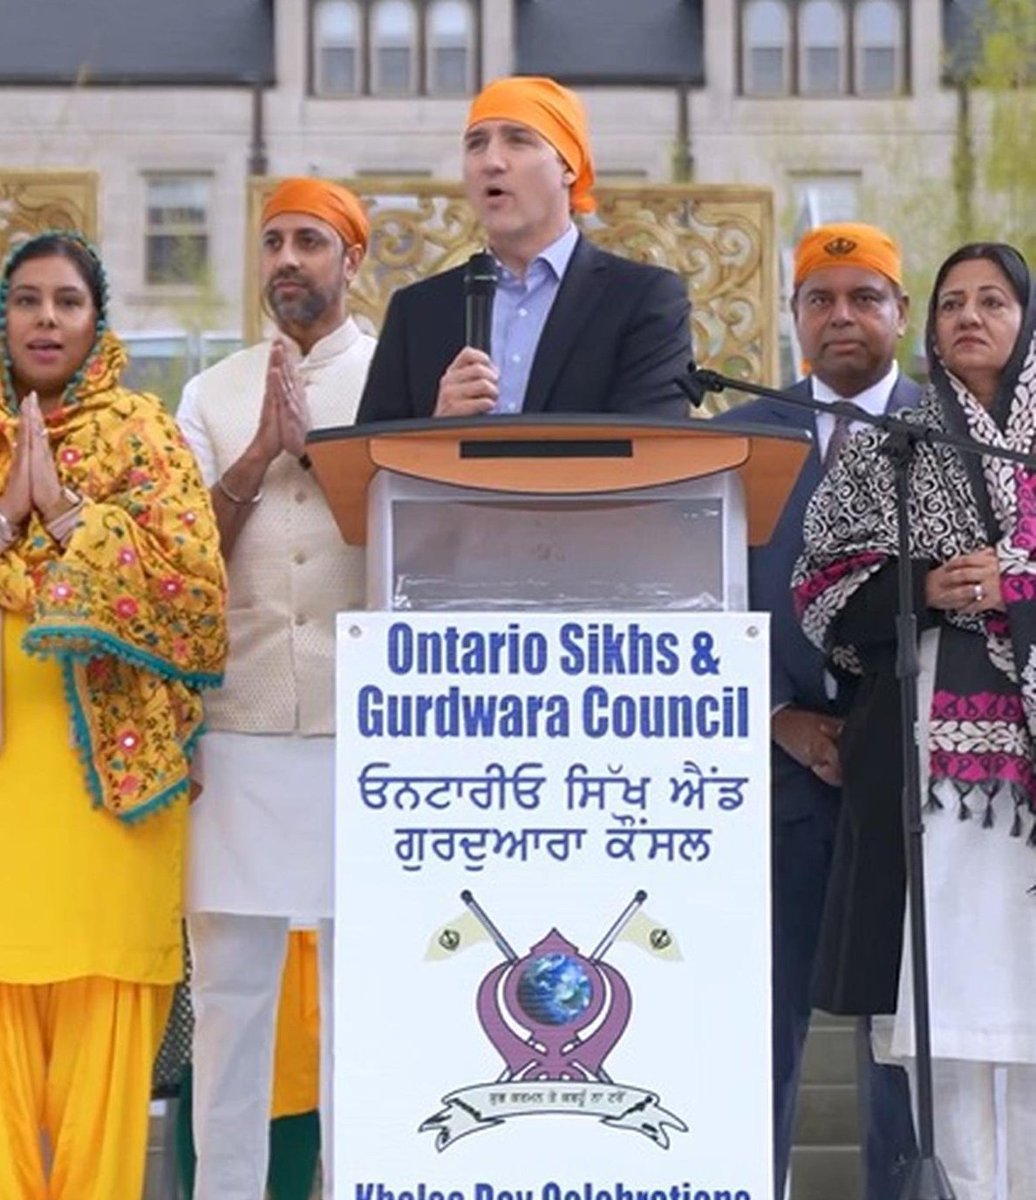 HUGE 🚨 India summons Canadian diplomat after pro-KhaIistan slogans raised in Trudeau’s event 🔥🔥 MEA ⚡⚡ - 'This illustrates once again the political space has been given in Canada to separatism, extremism and vioIence' 'The continued expressions also encourage a climate of…